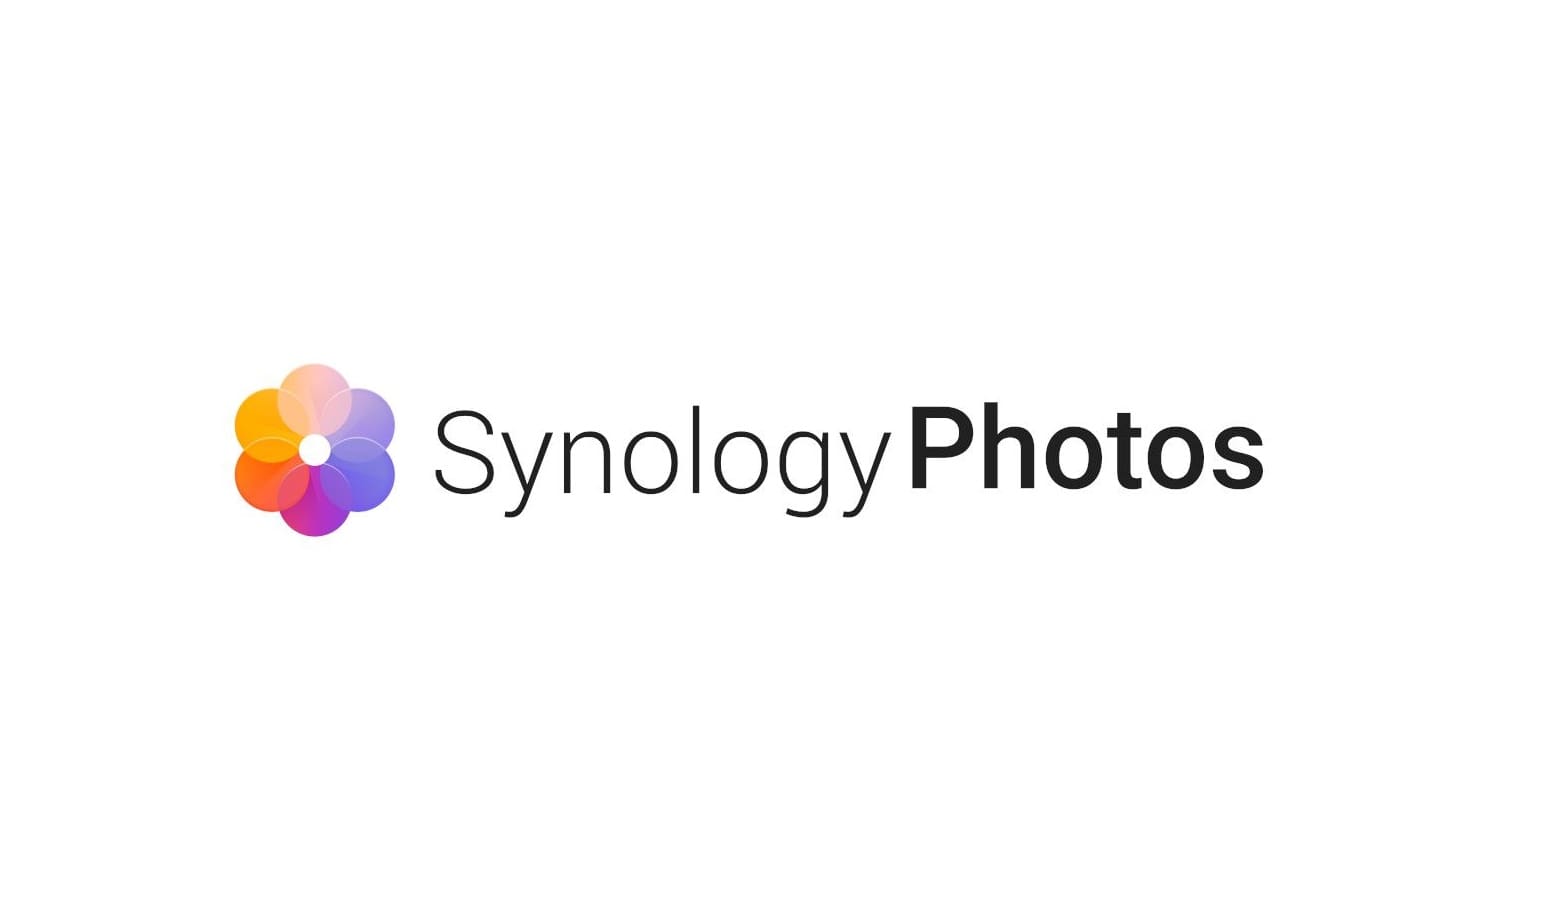 Reset & Reindex Facial Recognition in Synology NAS Photos